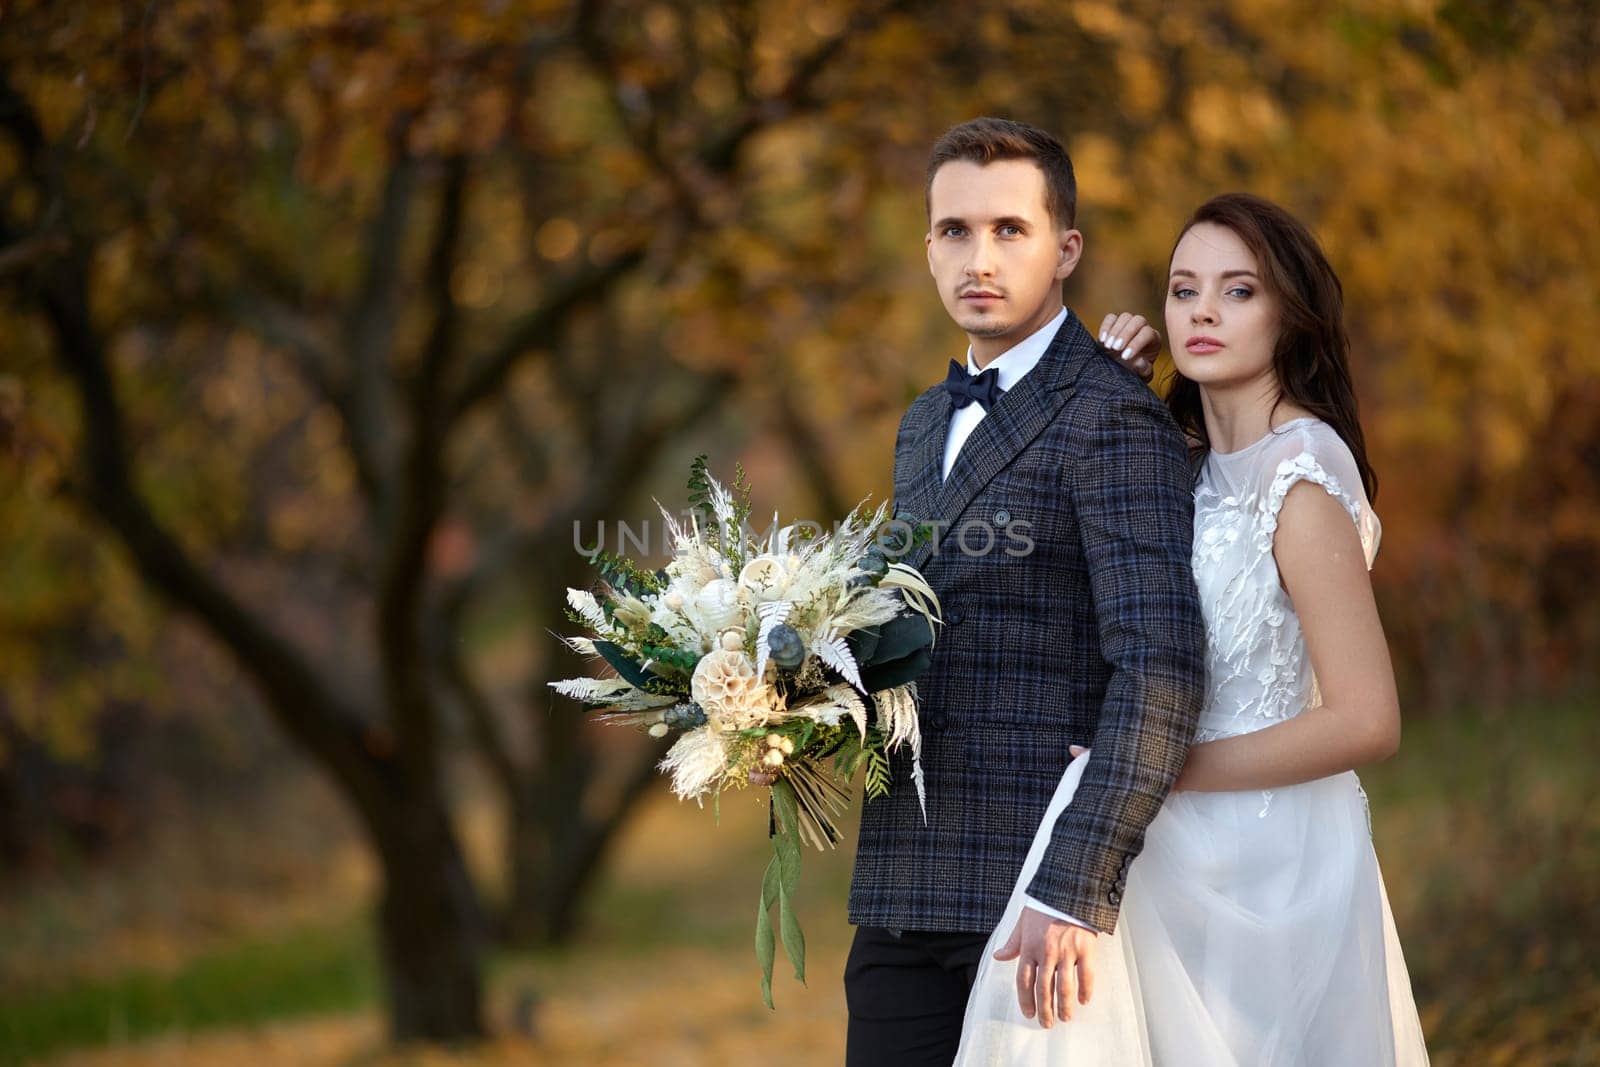 beautiful sensual bride in white wedding dress and groom standing outdoor on natural background